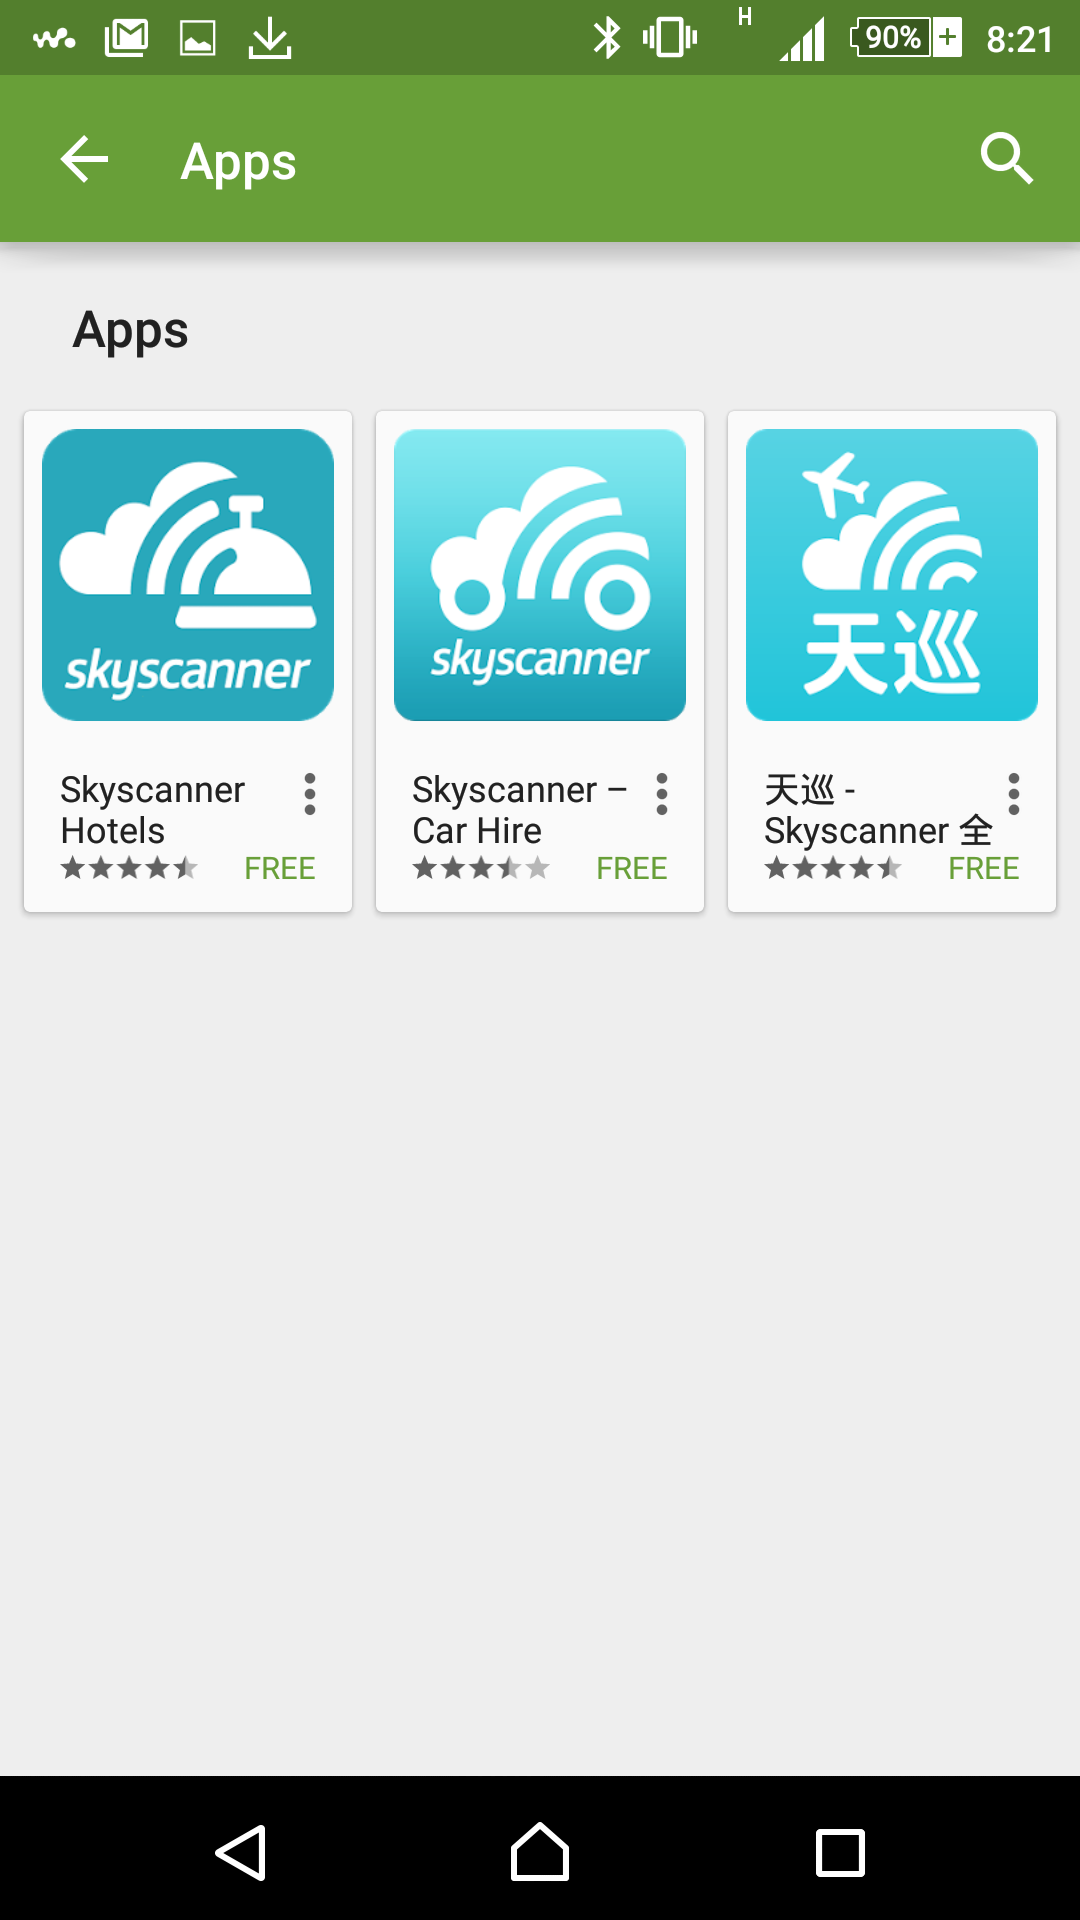 Skyscanner, who are they and what do they do?